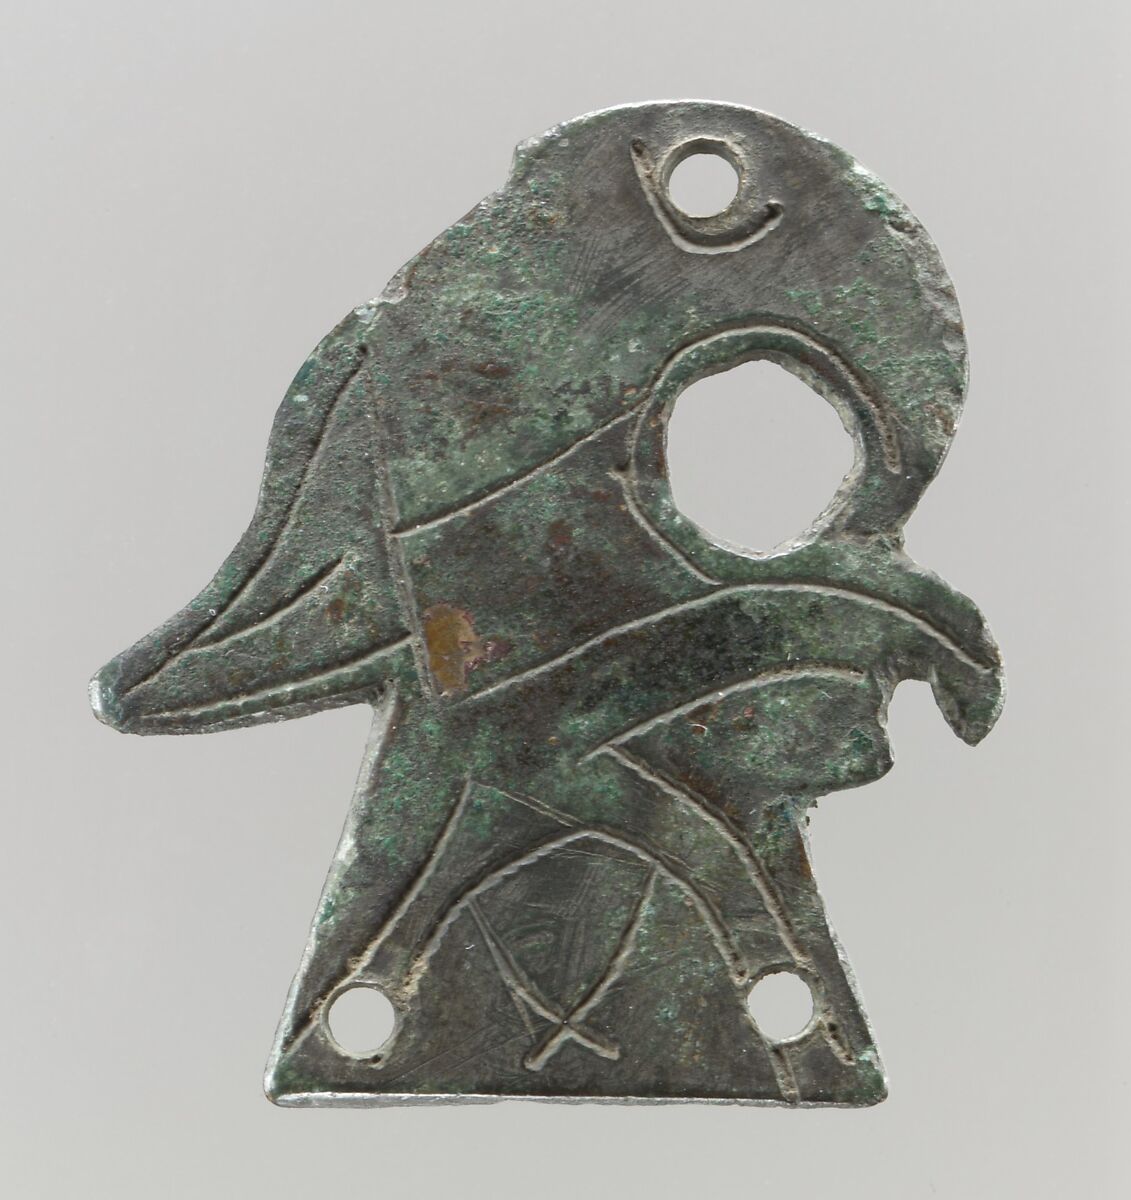 Shield Mount in the Shape of Bird, Copper alloy, "tinned" surface, Frankish 